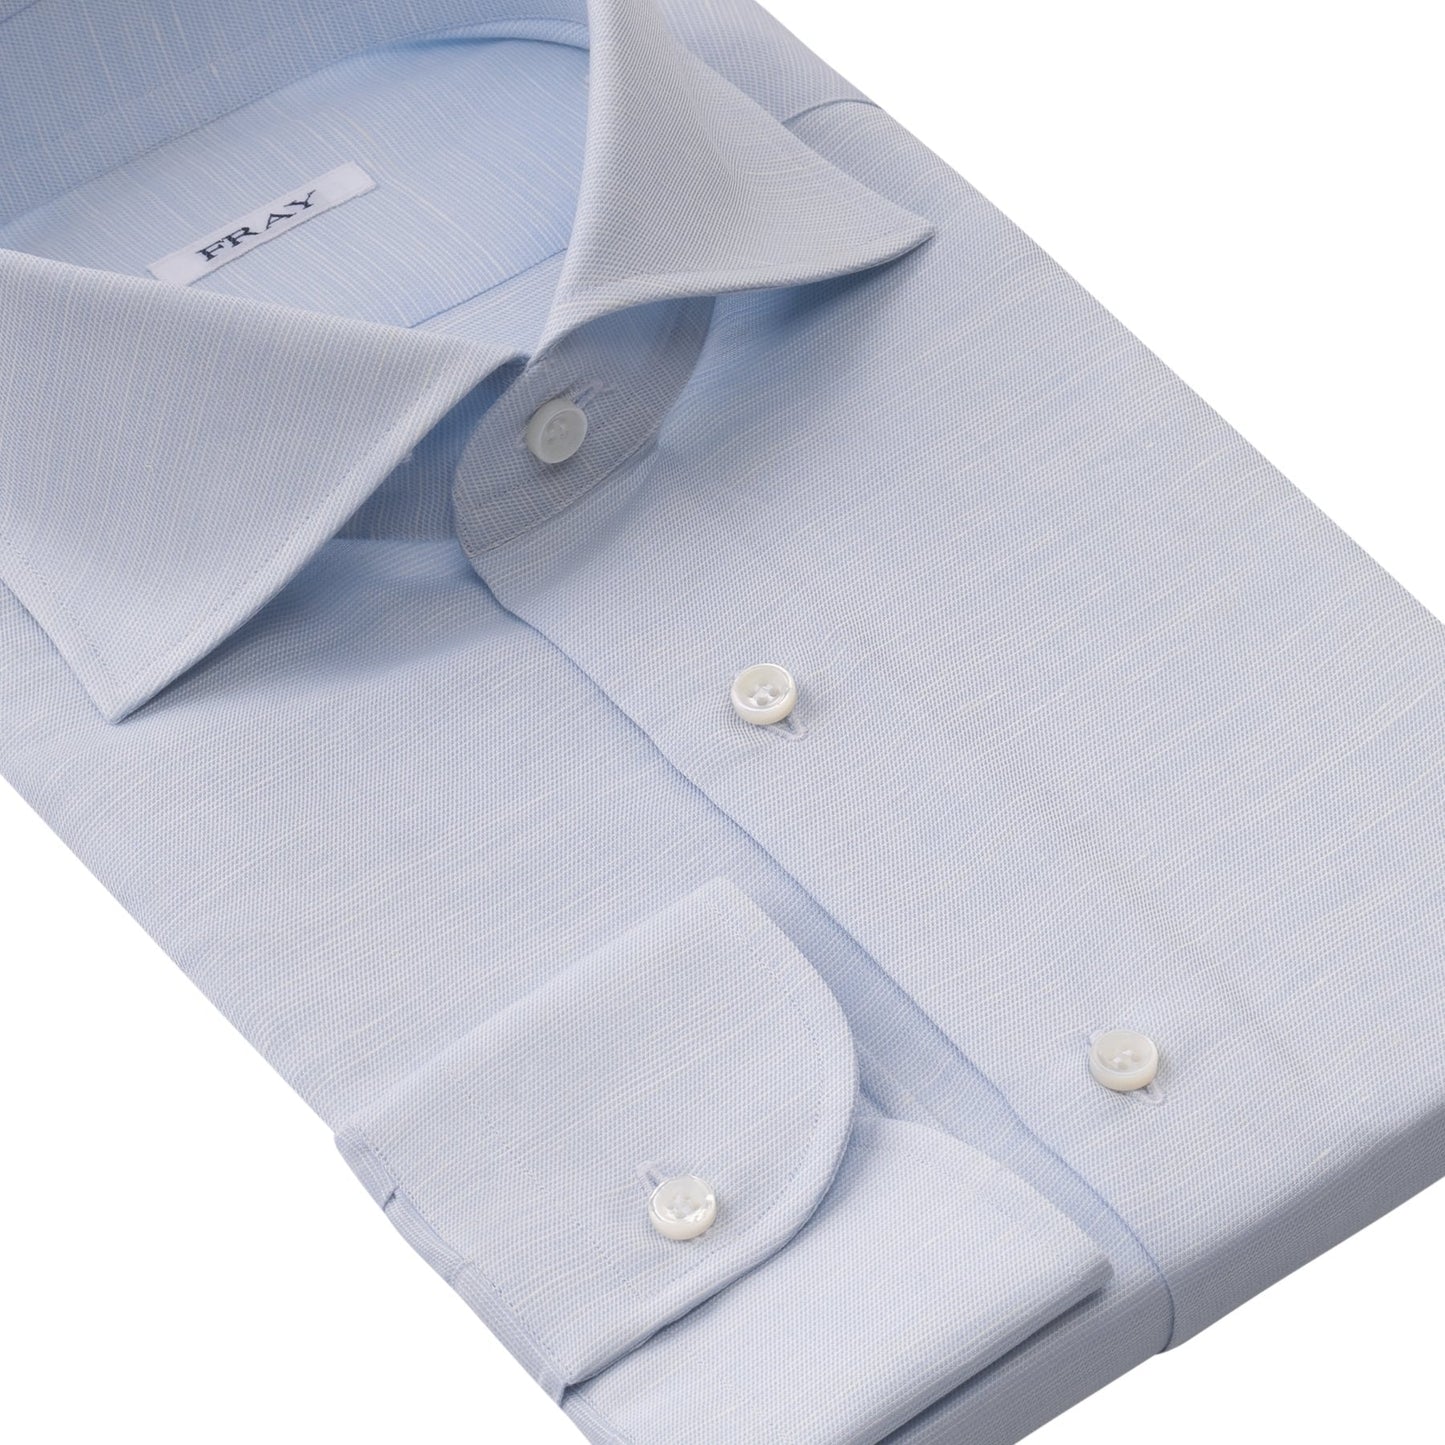 Fray Cotton and Hemp-Blend Light Blue Shirt with Round French Cuff - SARTALE